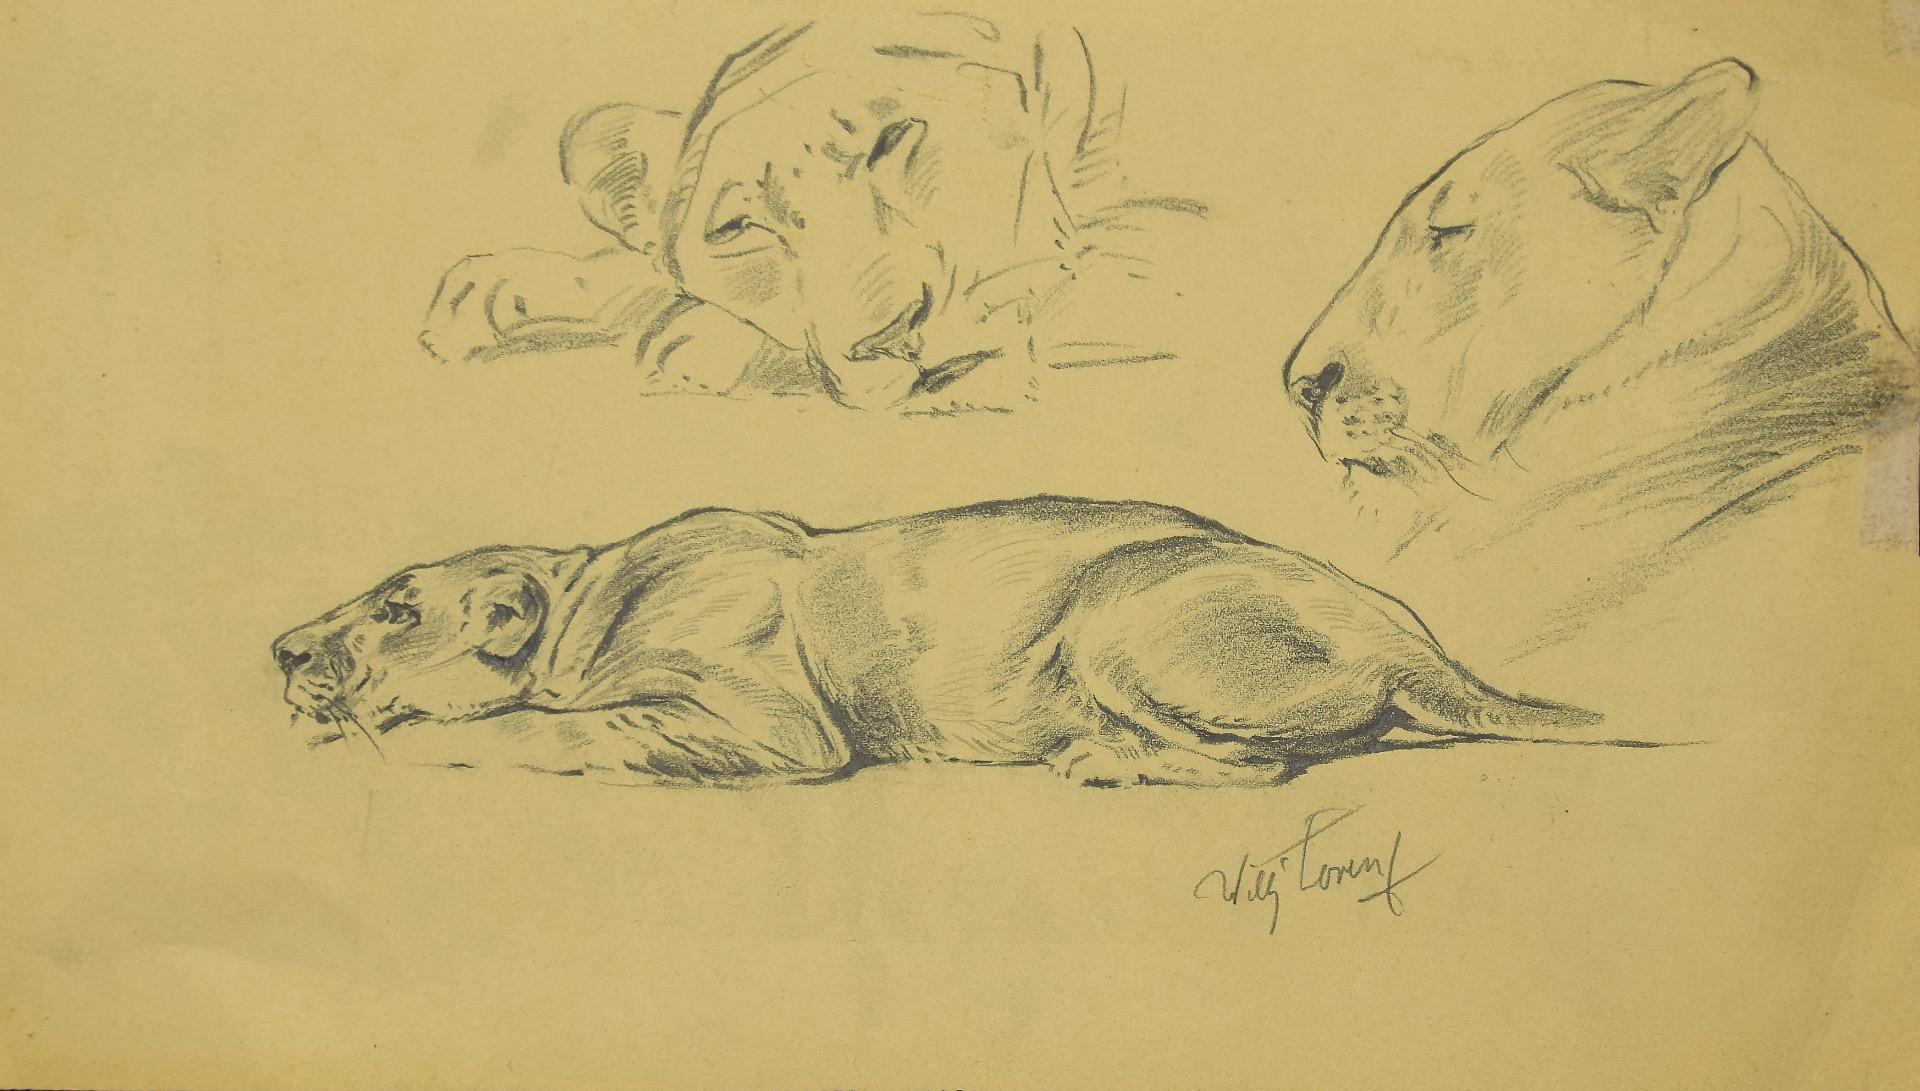 Sketch is an amazing pencil drawing on ivory-colored paper, realized by the German artist Wilhelm Lorenz, also called Willi Lorenz. Signed in pencil on the lower right margin.

This is a preparatory study representing a tiger lying down at rest in